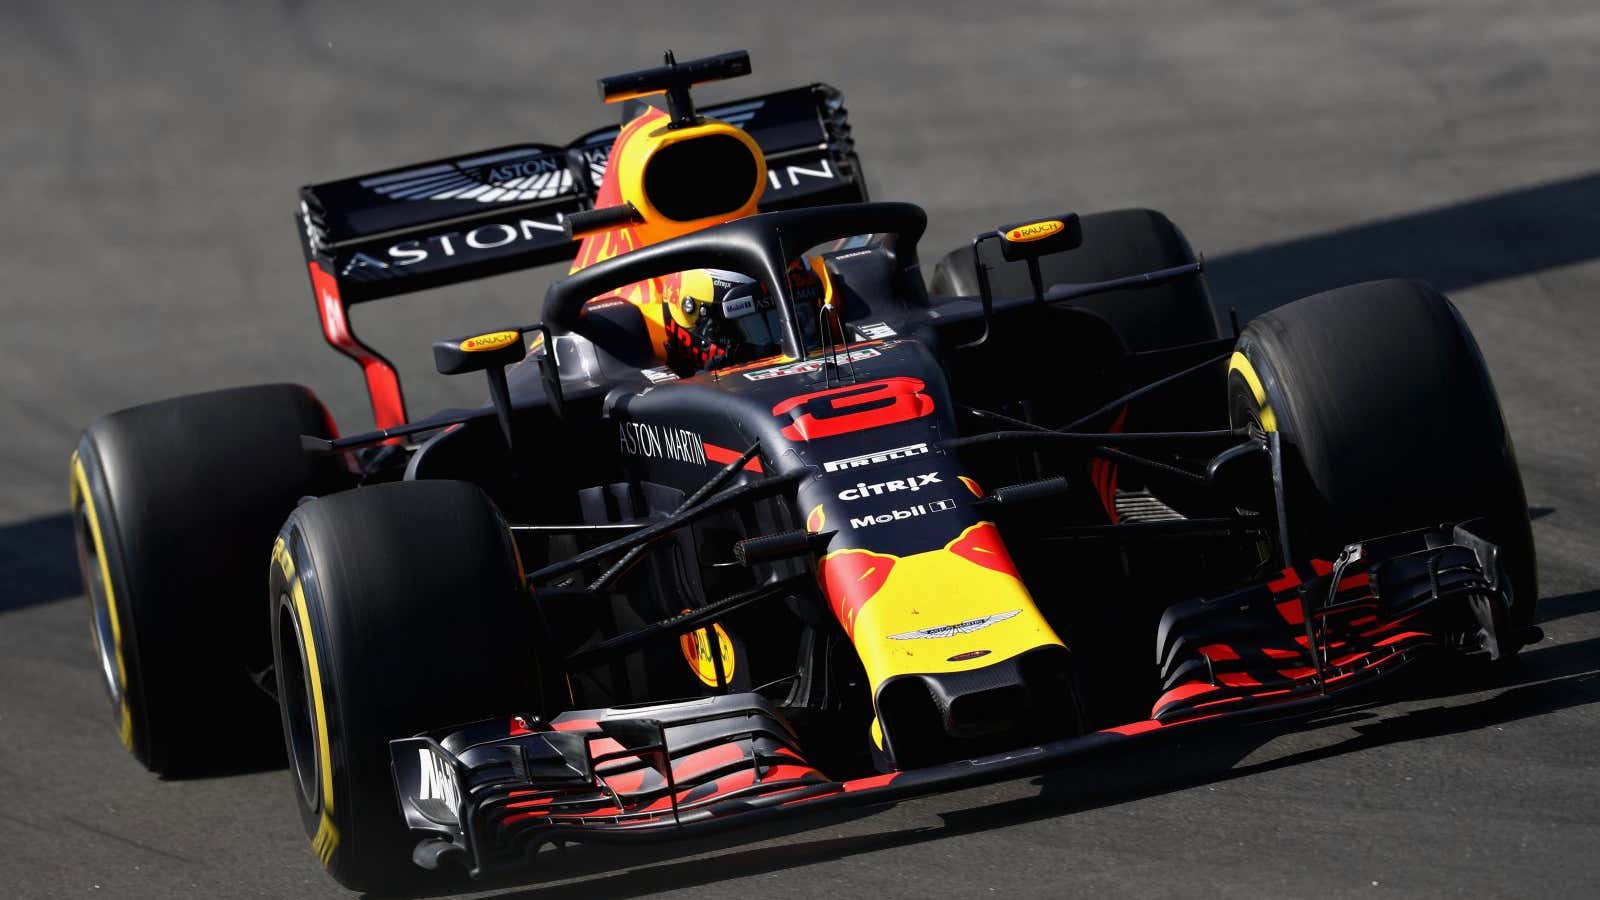 Technology and sport: how Aston Martin Red Bull racing is outpacing the competition